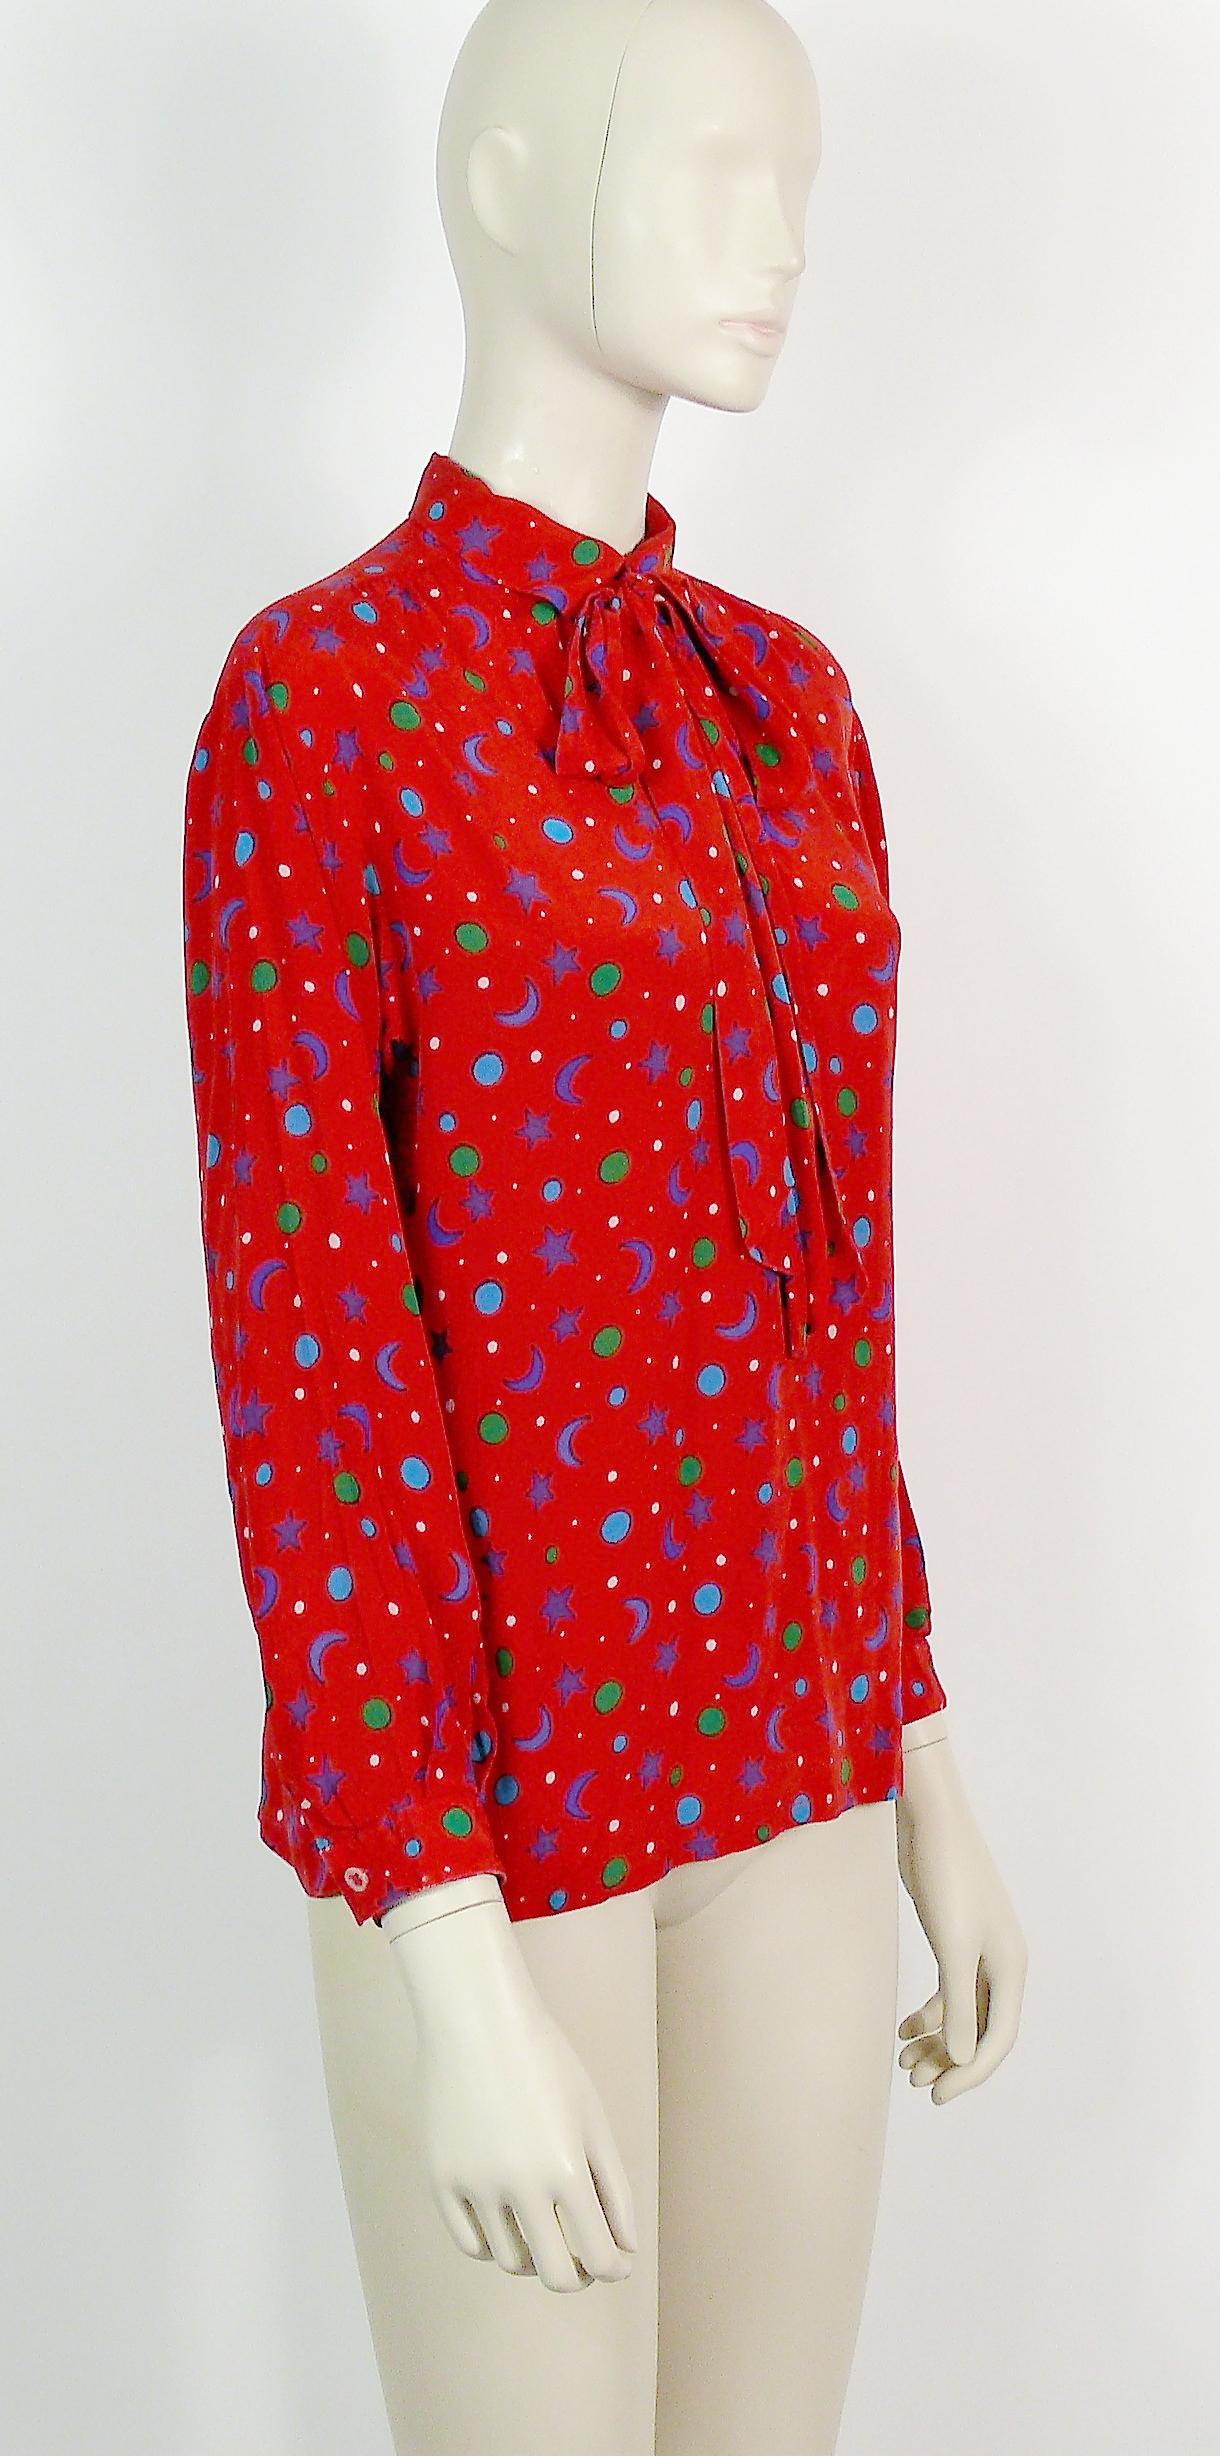 YVES SAINT LAURENT vintage red silk blouse featuring a multicolored suns-crescent moons-stars-dots print and a lavallière neck tie.

Slips on (no button closure down the front).
Cuff buttoning.

Label reads SAINT LAURENT RIVE GAUCHE Paris.
Made in